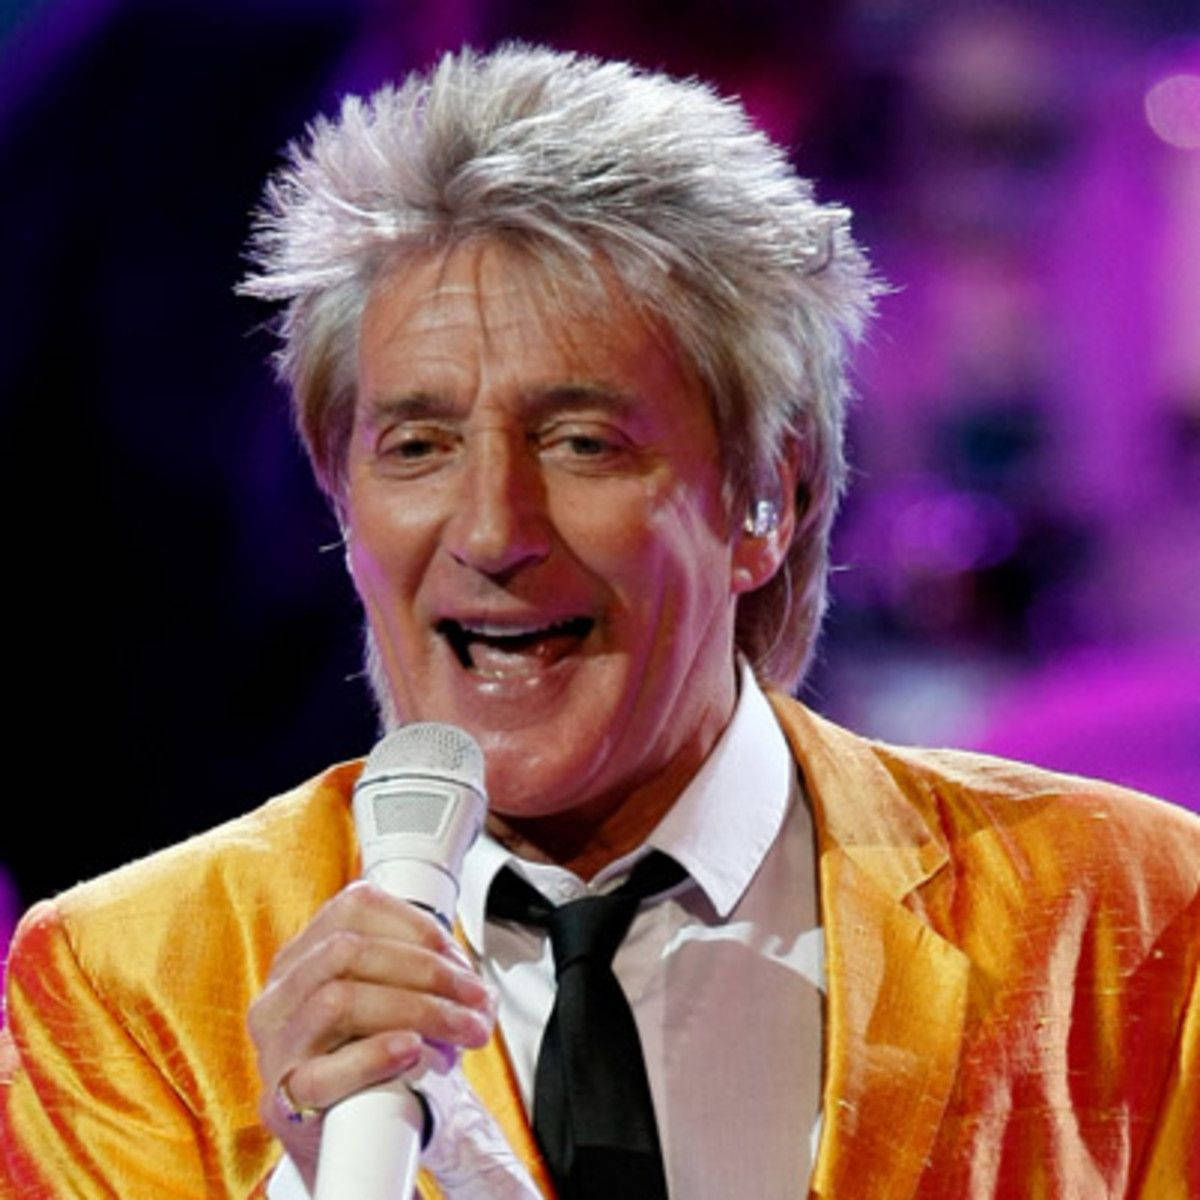 Renowned Performer Rod Stewart Live in Concert Wallpaper